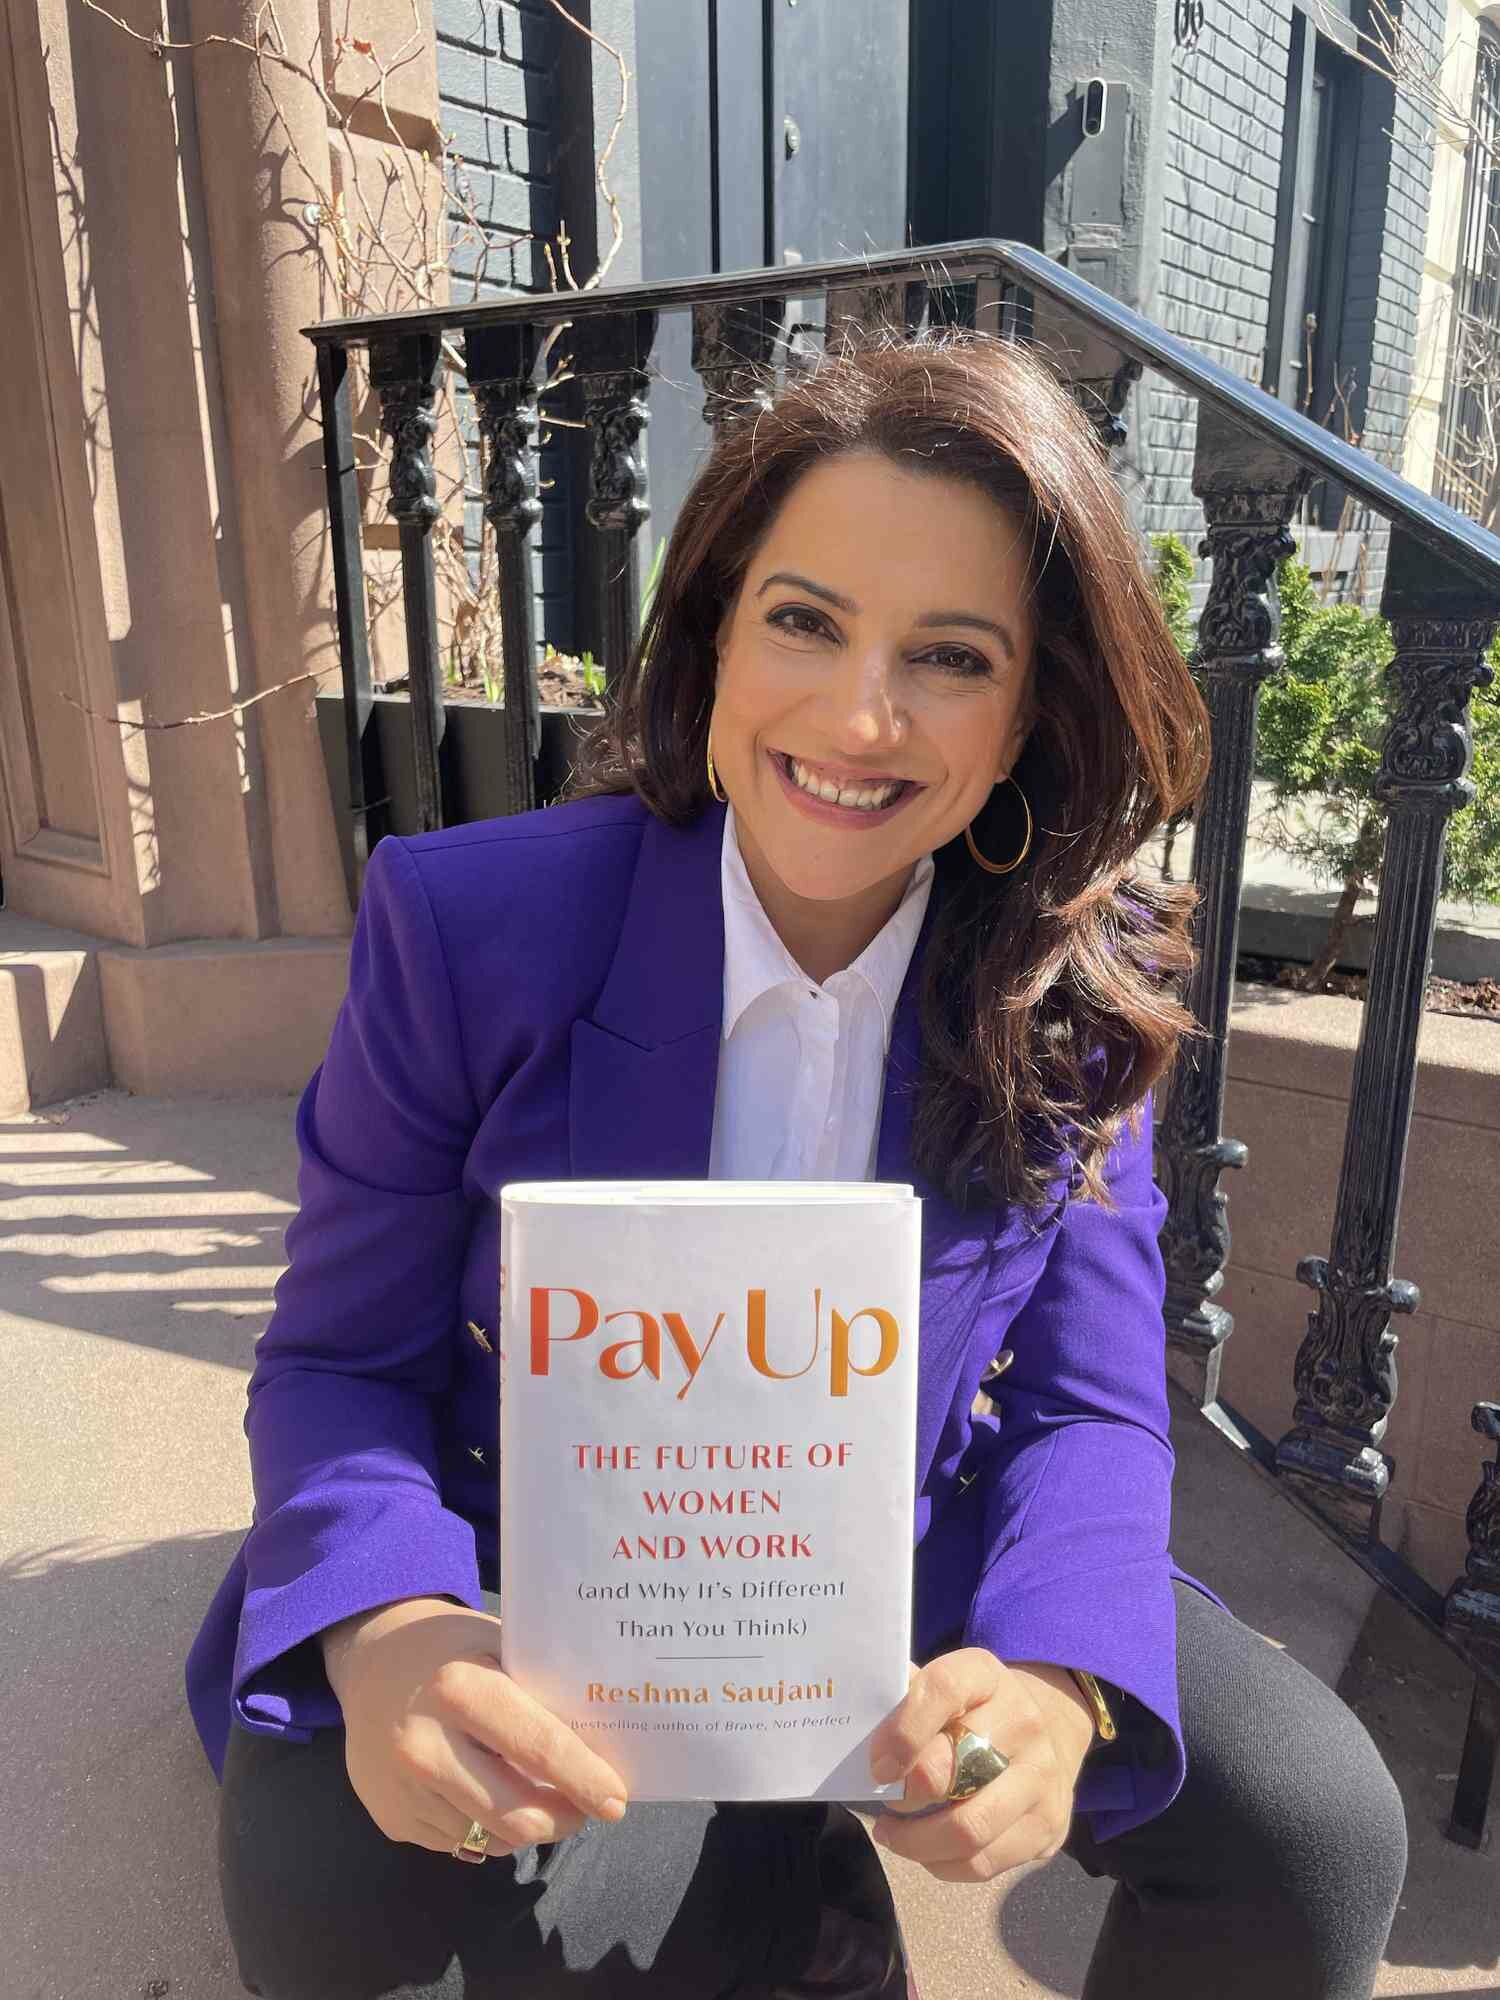 Reshma Saujani with one of her books, Pay Up